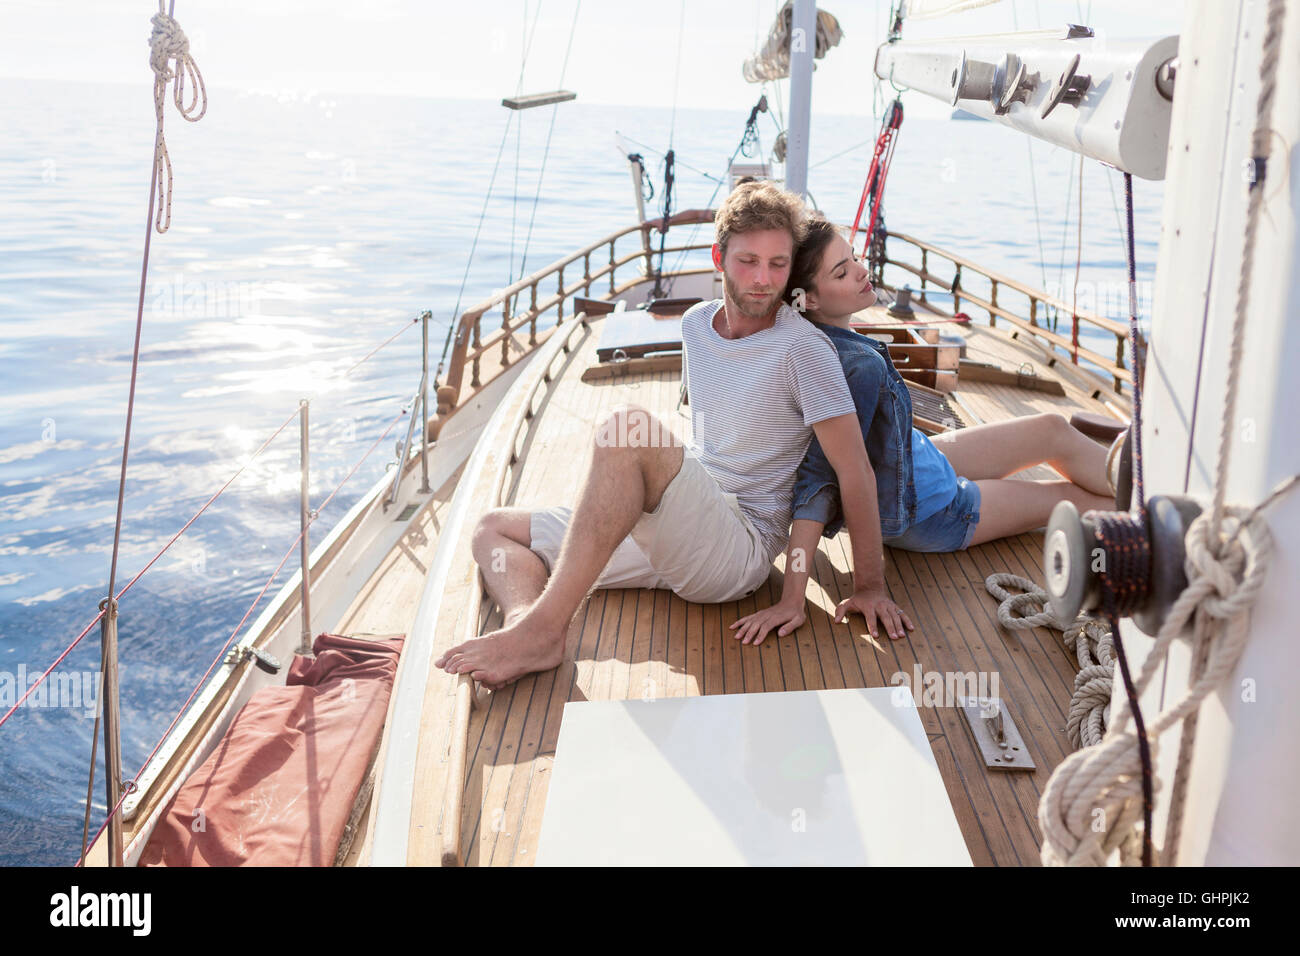 Young couple sitting back to back on sailboat Stock Photo